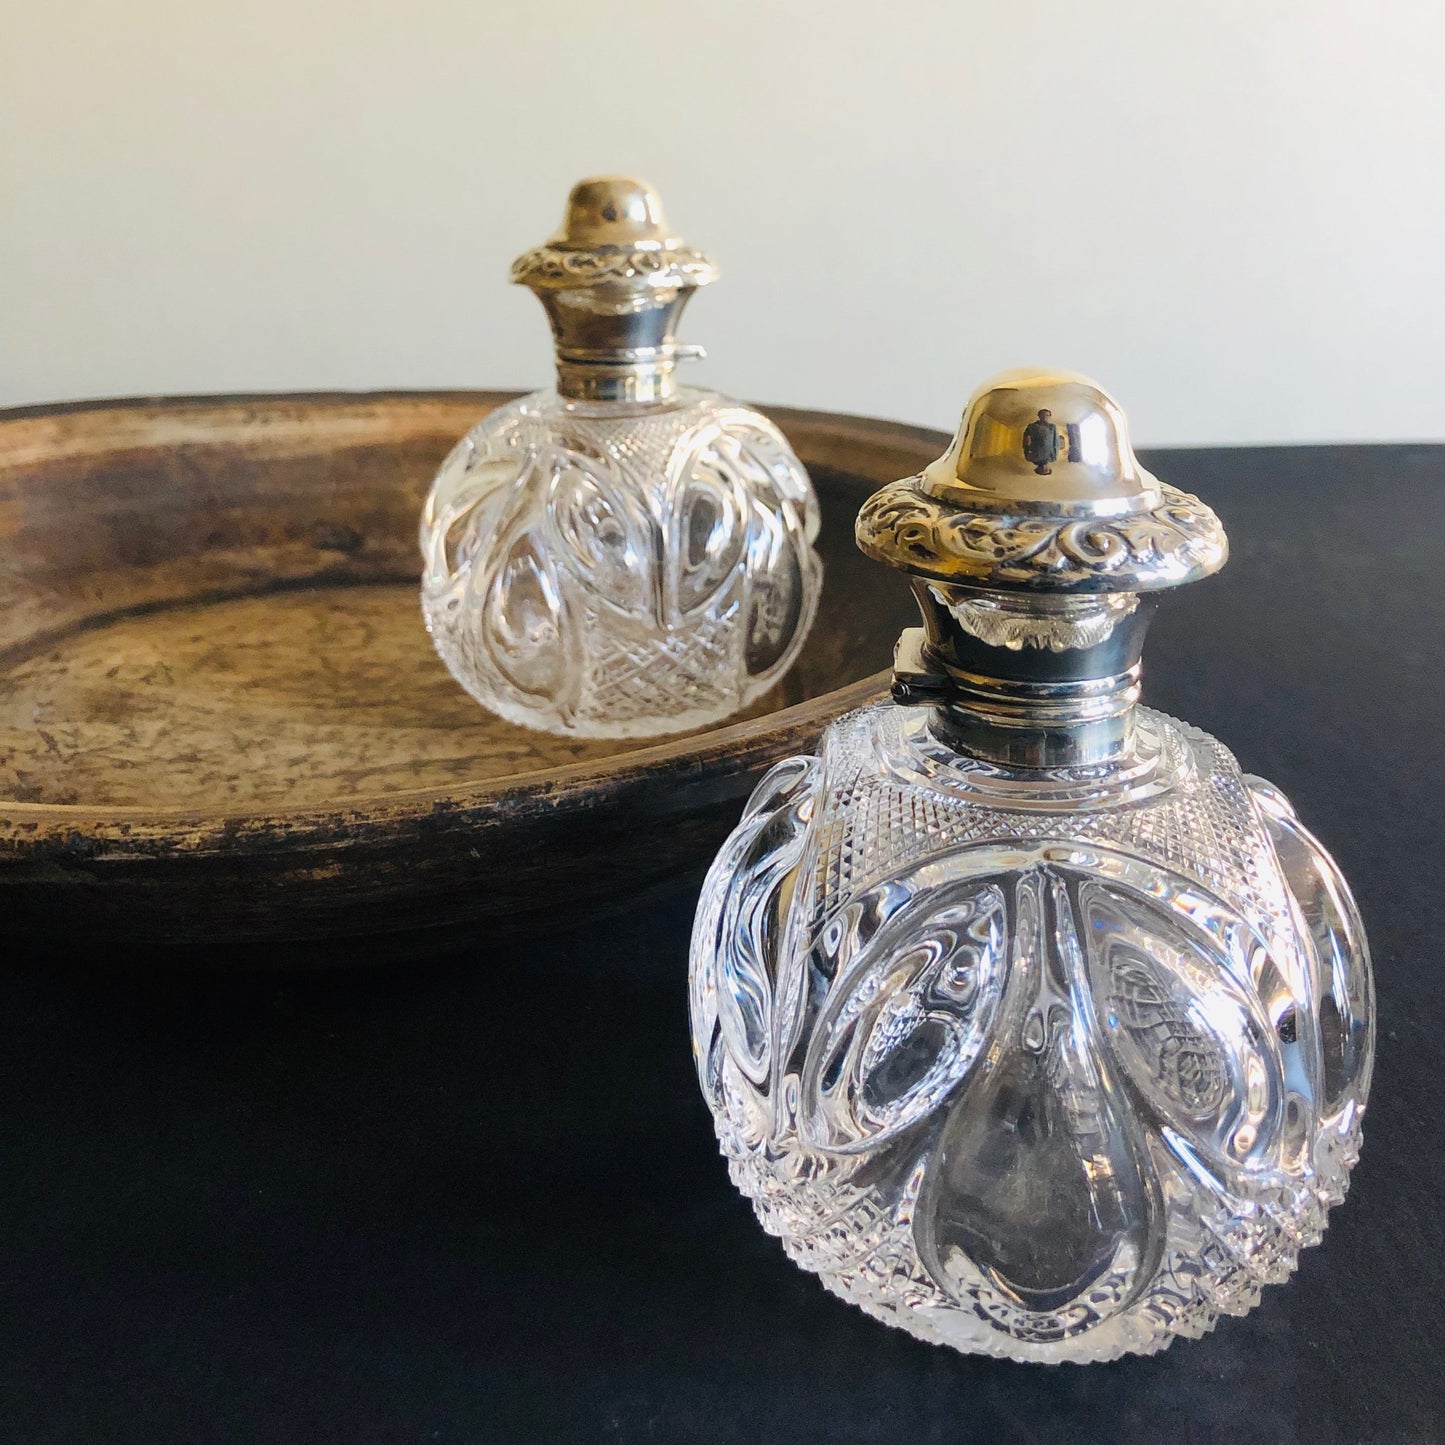 The Artist Peyton - Pair of Antique Silver Topped Perfume Bottles